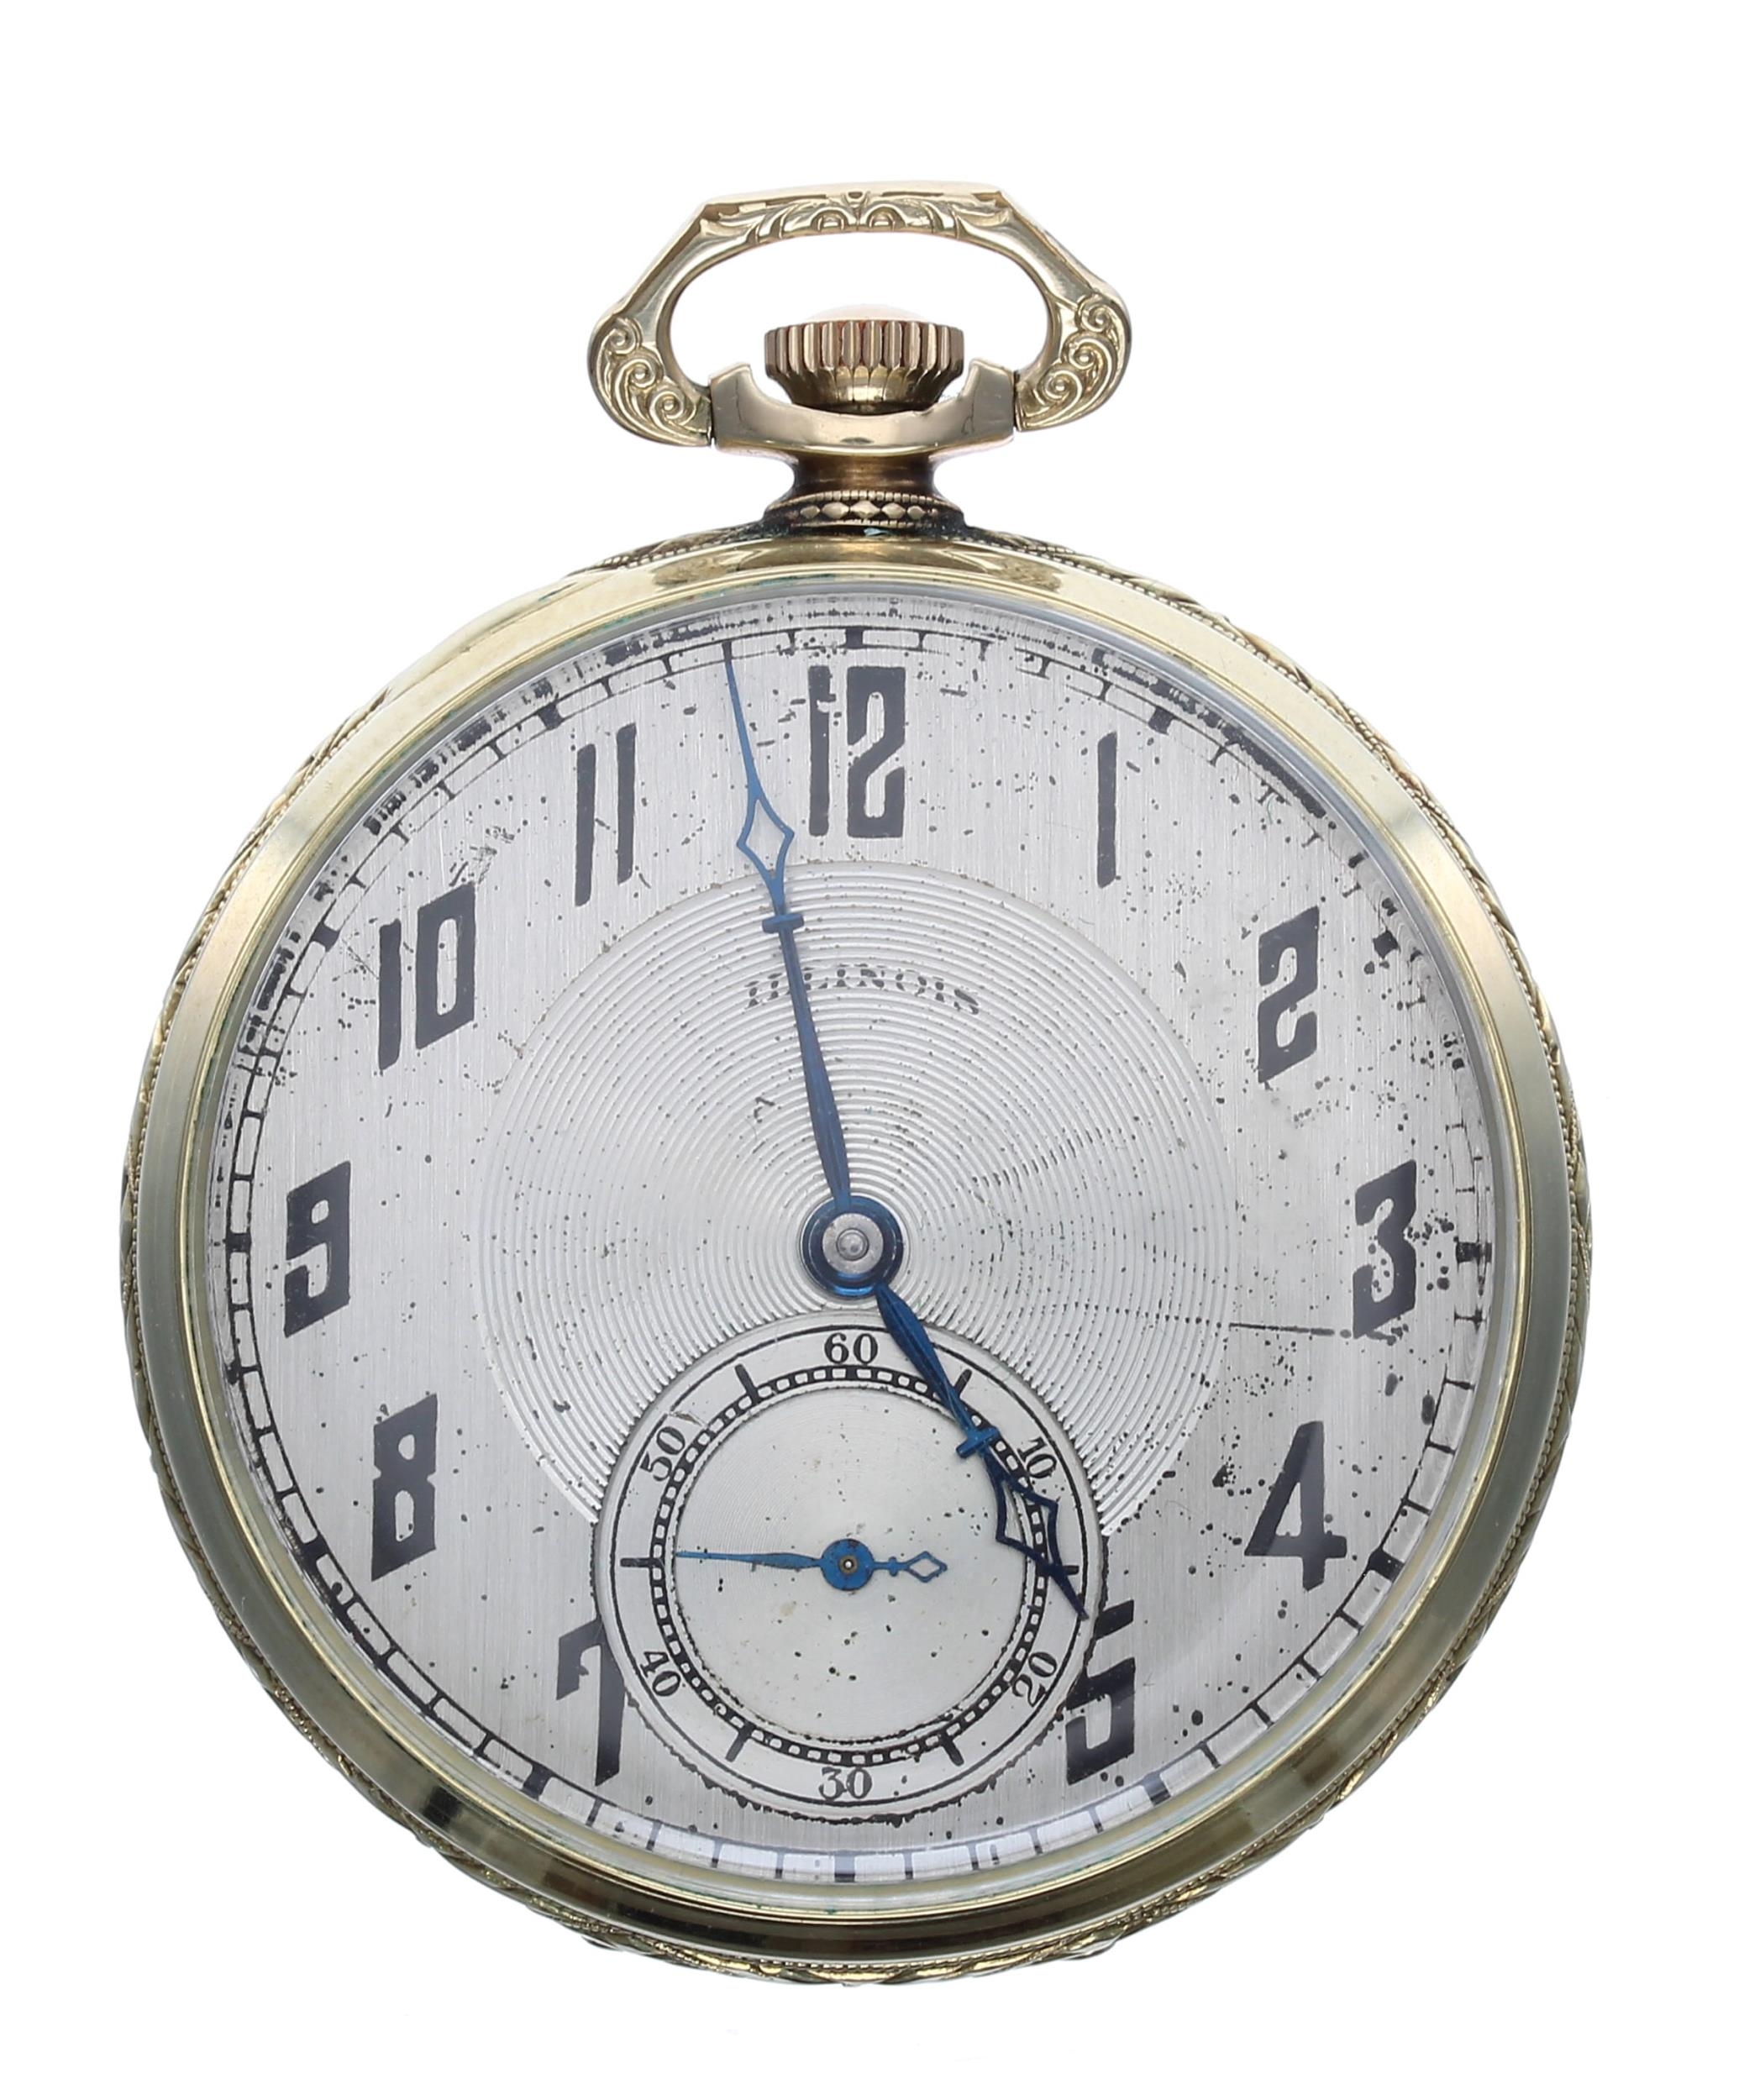 Illinois Watch Co. 'The Autocrat' 14k gold filled lever dress pocket watch, circa 1924, signed 17 - Image 2 of 4